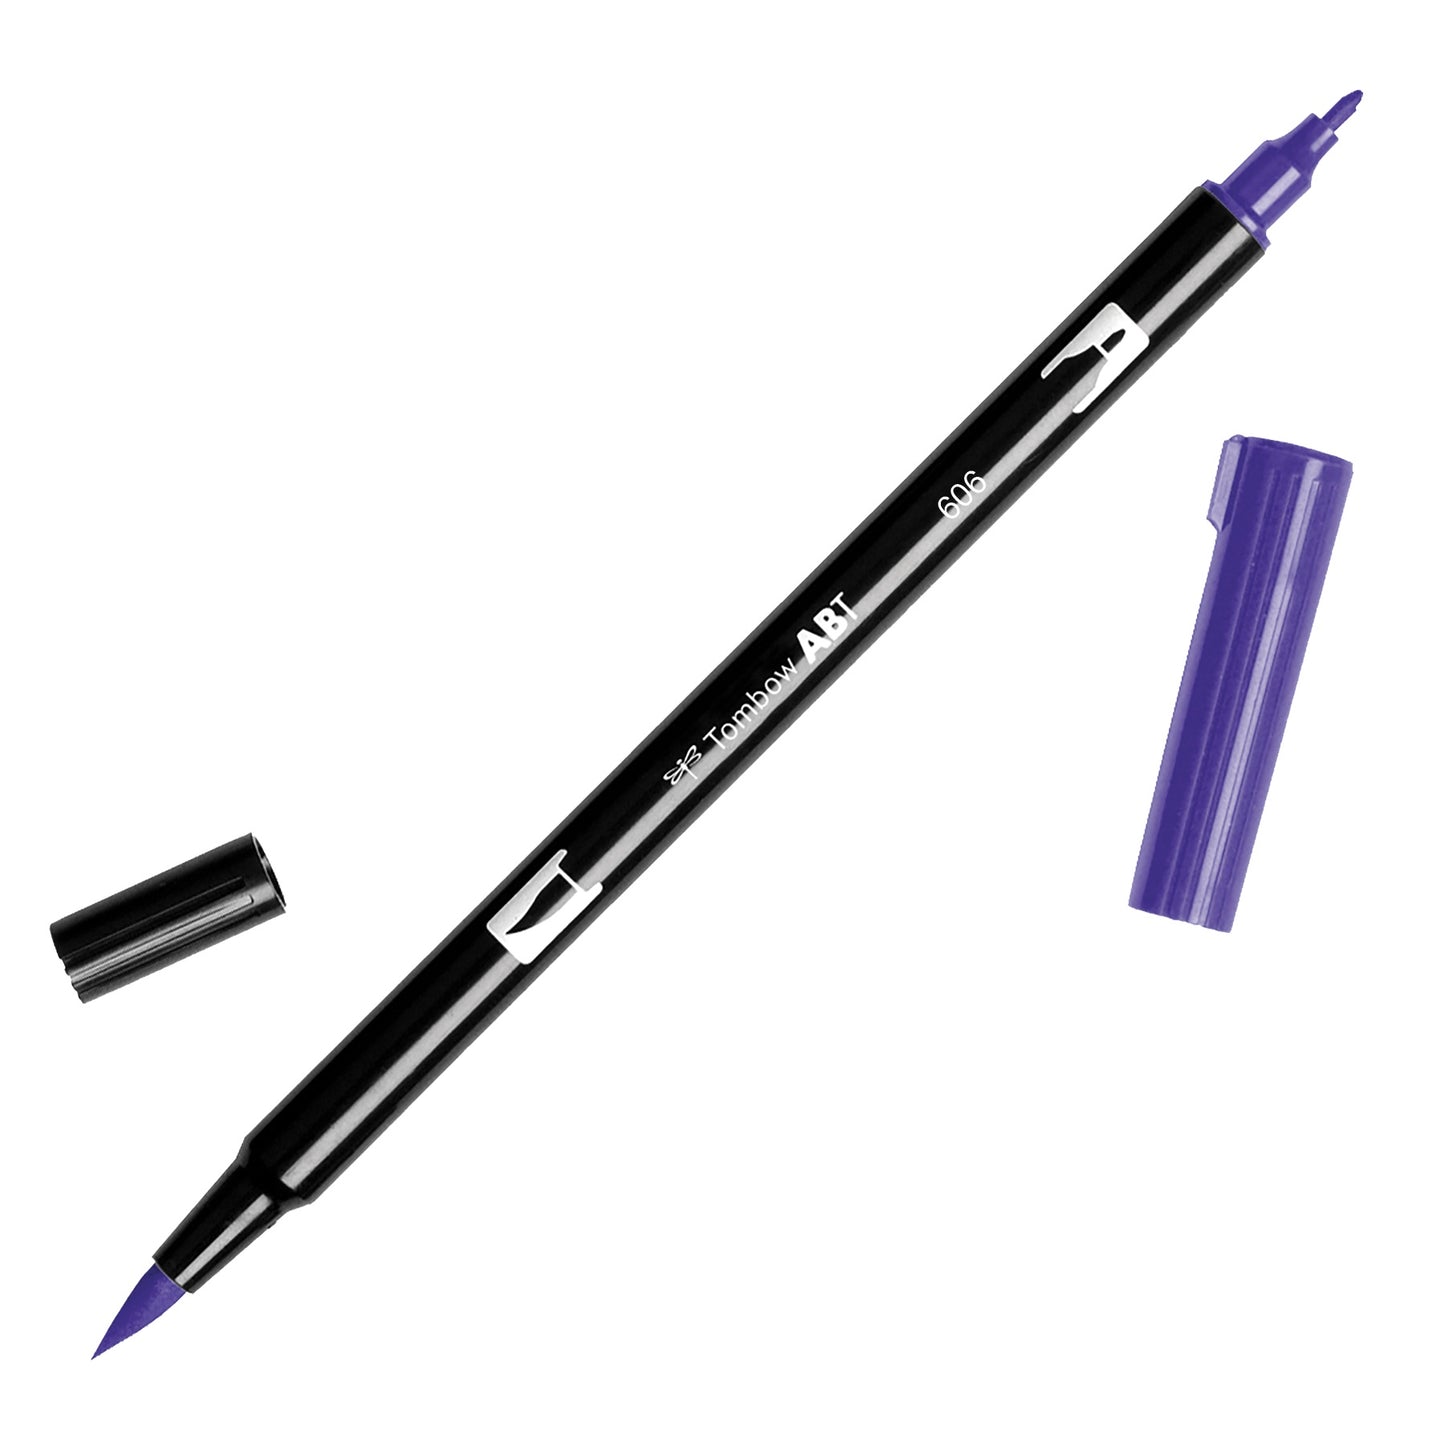 TOMBOW 606 VIOLET DUAL BRUSH MARKER